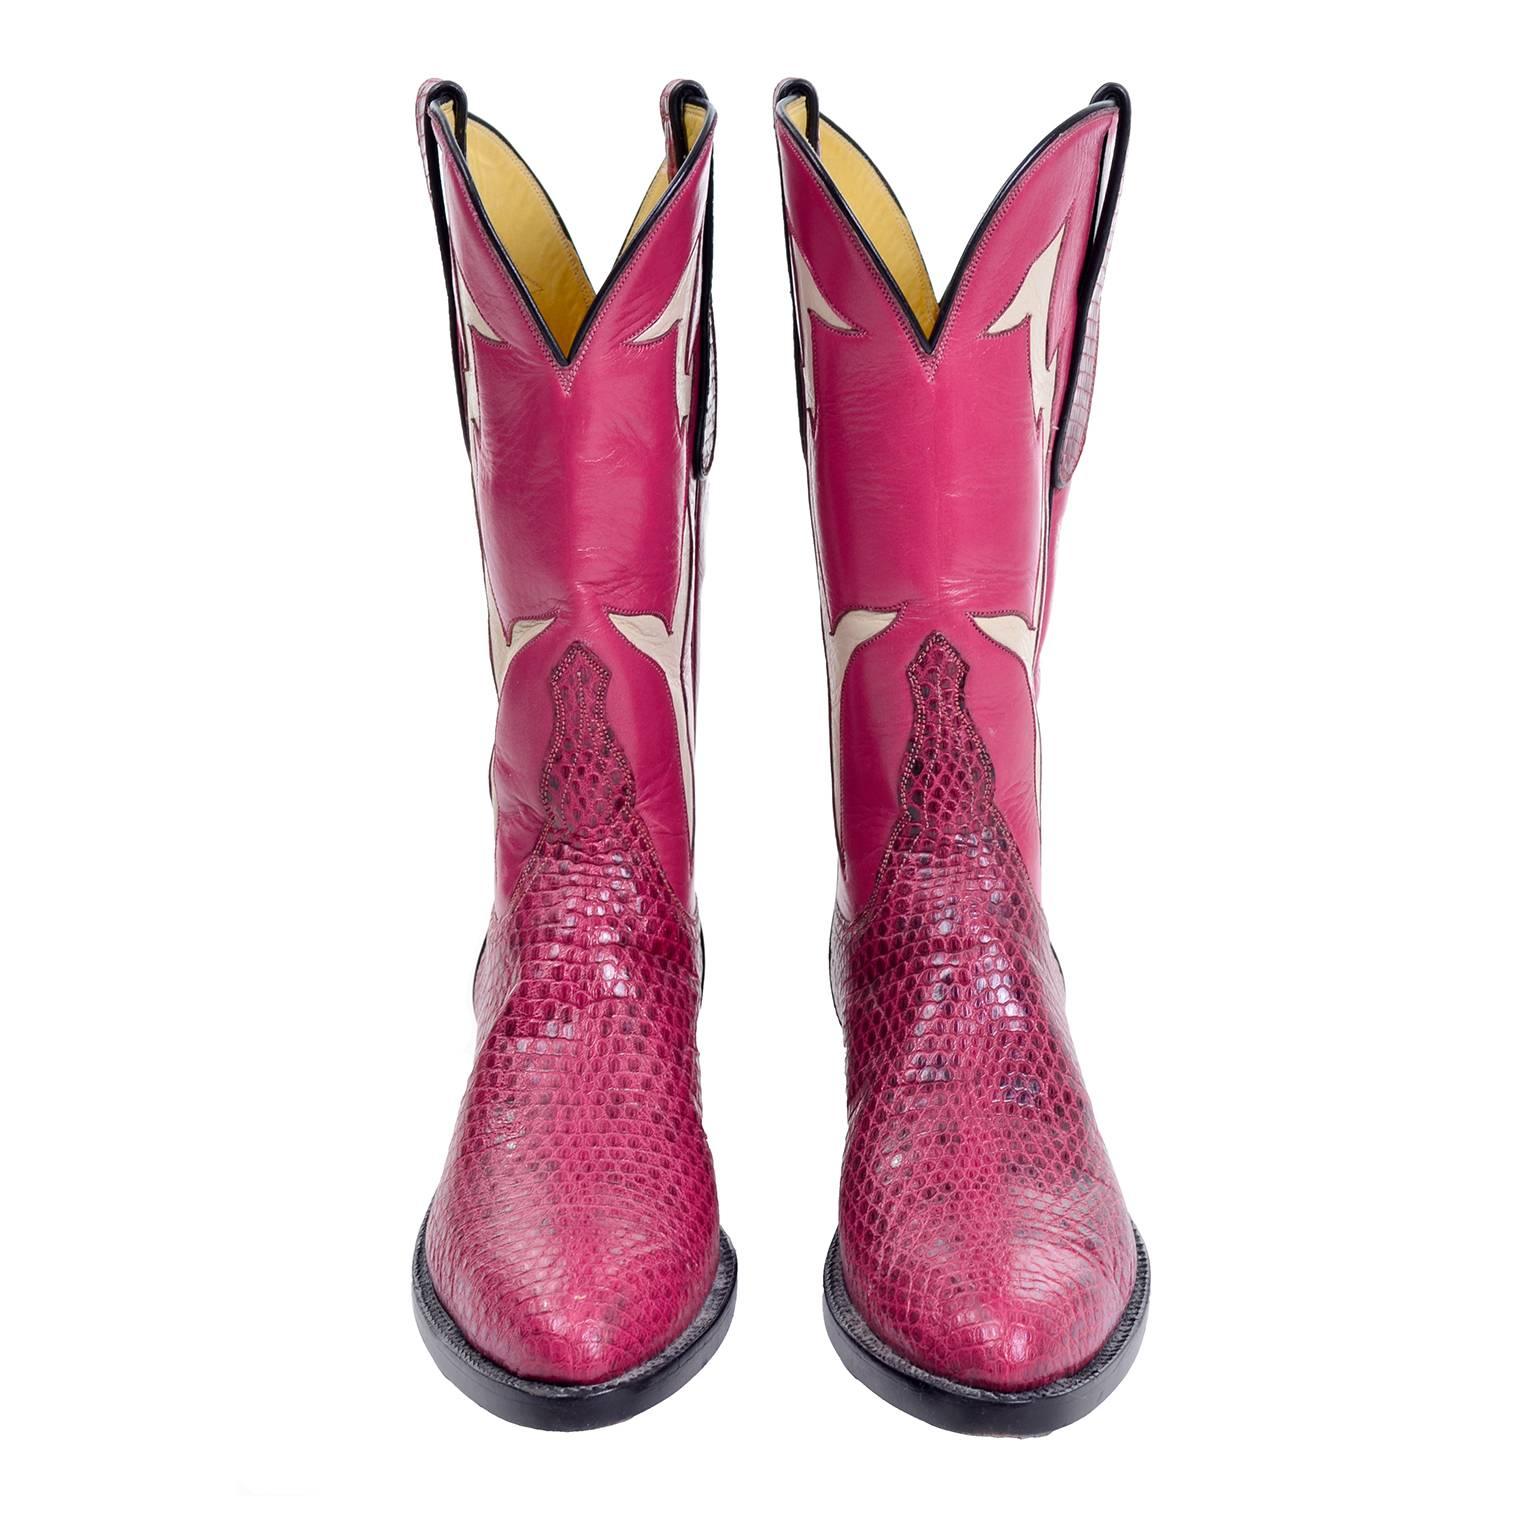 These are rare Tom Taylor Custom Boots from Santa Fe in Pink leather and pink dyed snakeskin. These cowboy boots are in excellent condition, barely ever worn, and have only minor sole wear. The estate from which these boots came included high end